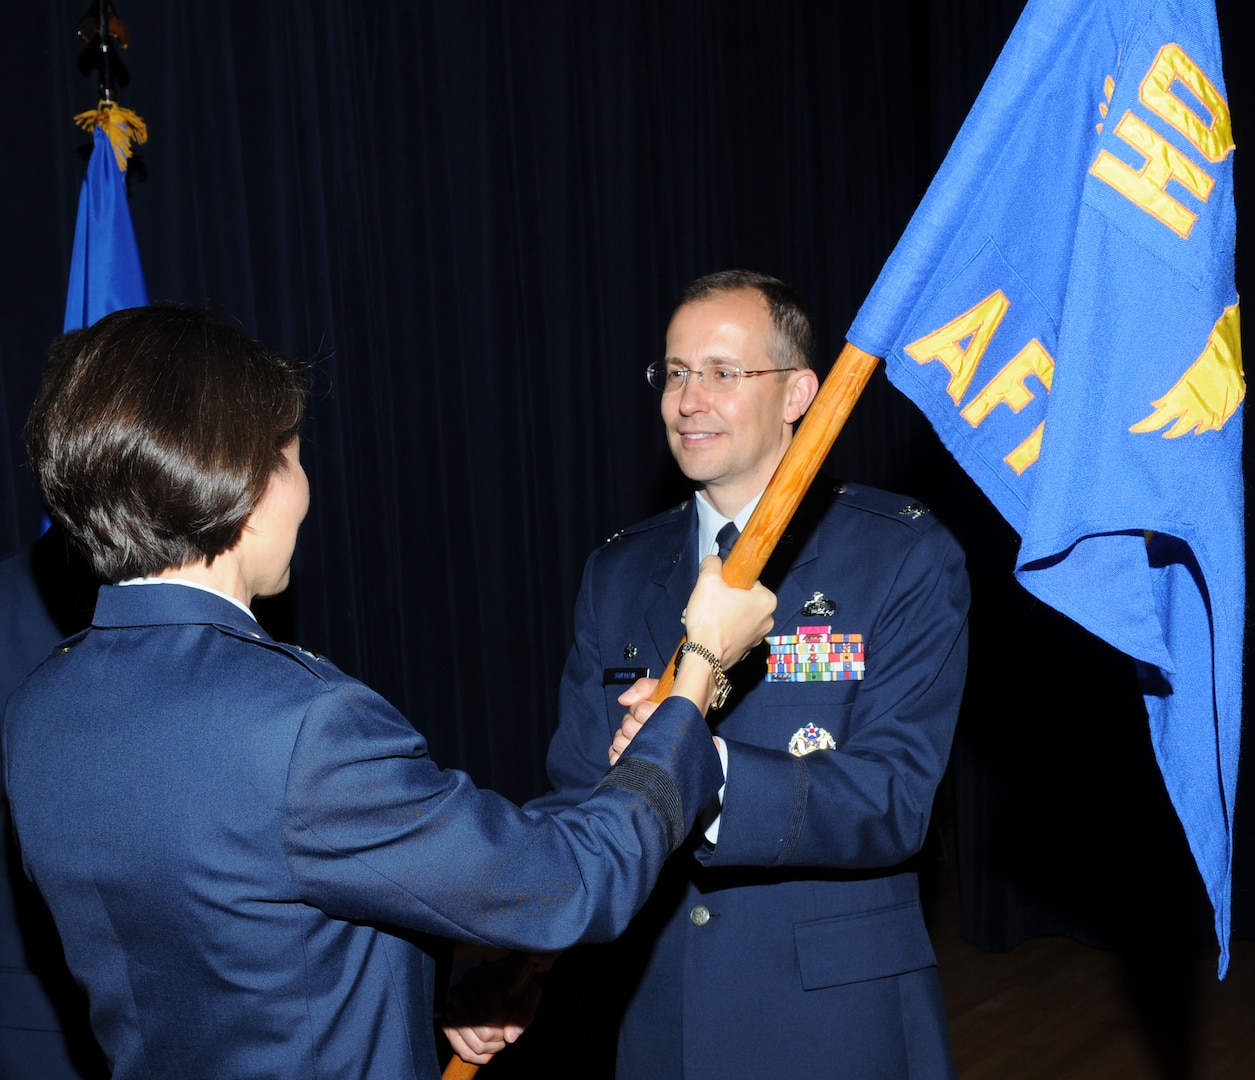 Col. Brian Norman, incoming Air Force Manpower Agency commander, takes the agency's guidon from Brig. Gen. Sharon Dunbar,  Director of Manpower, Organization and Resources, Deputy Chief of Staff for Manpower, Personnel and Services in Washington D.C., during a change of command ceremony June 30 at the Parr O'Club. (U.S. Air Force photo by Joel Martinez)